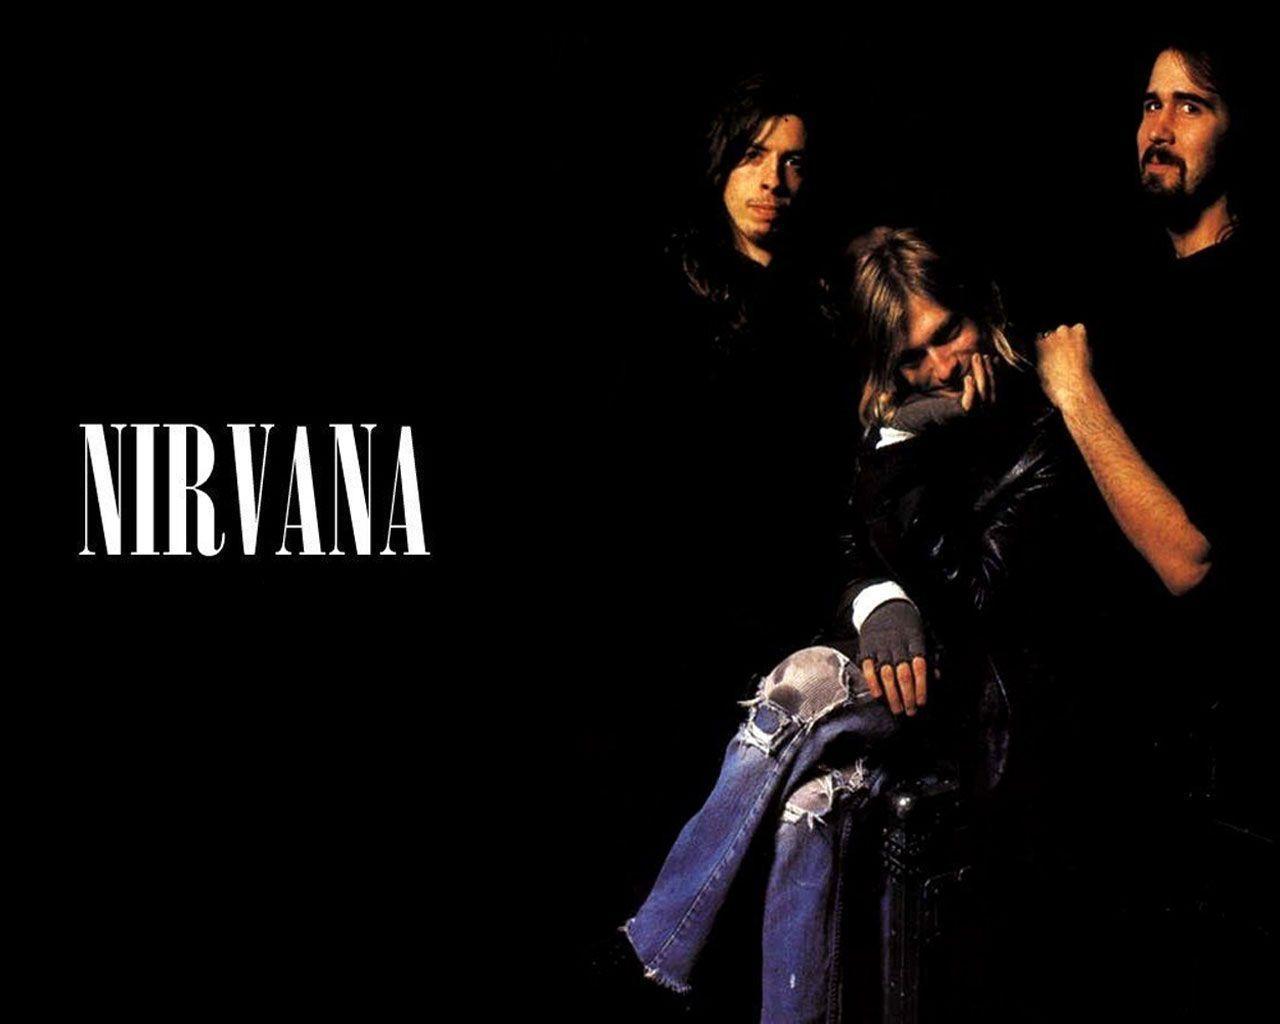 Wallpapers For > Nirvana Smiley Wallpapers